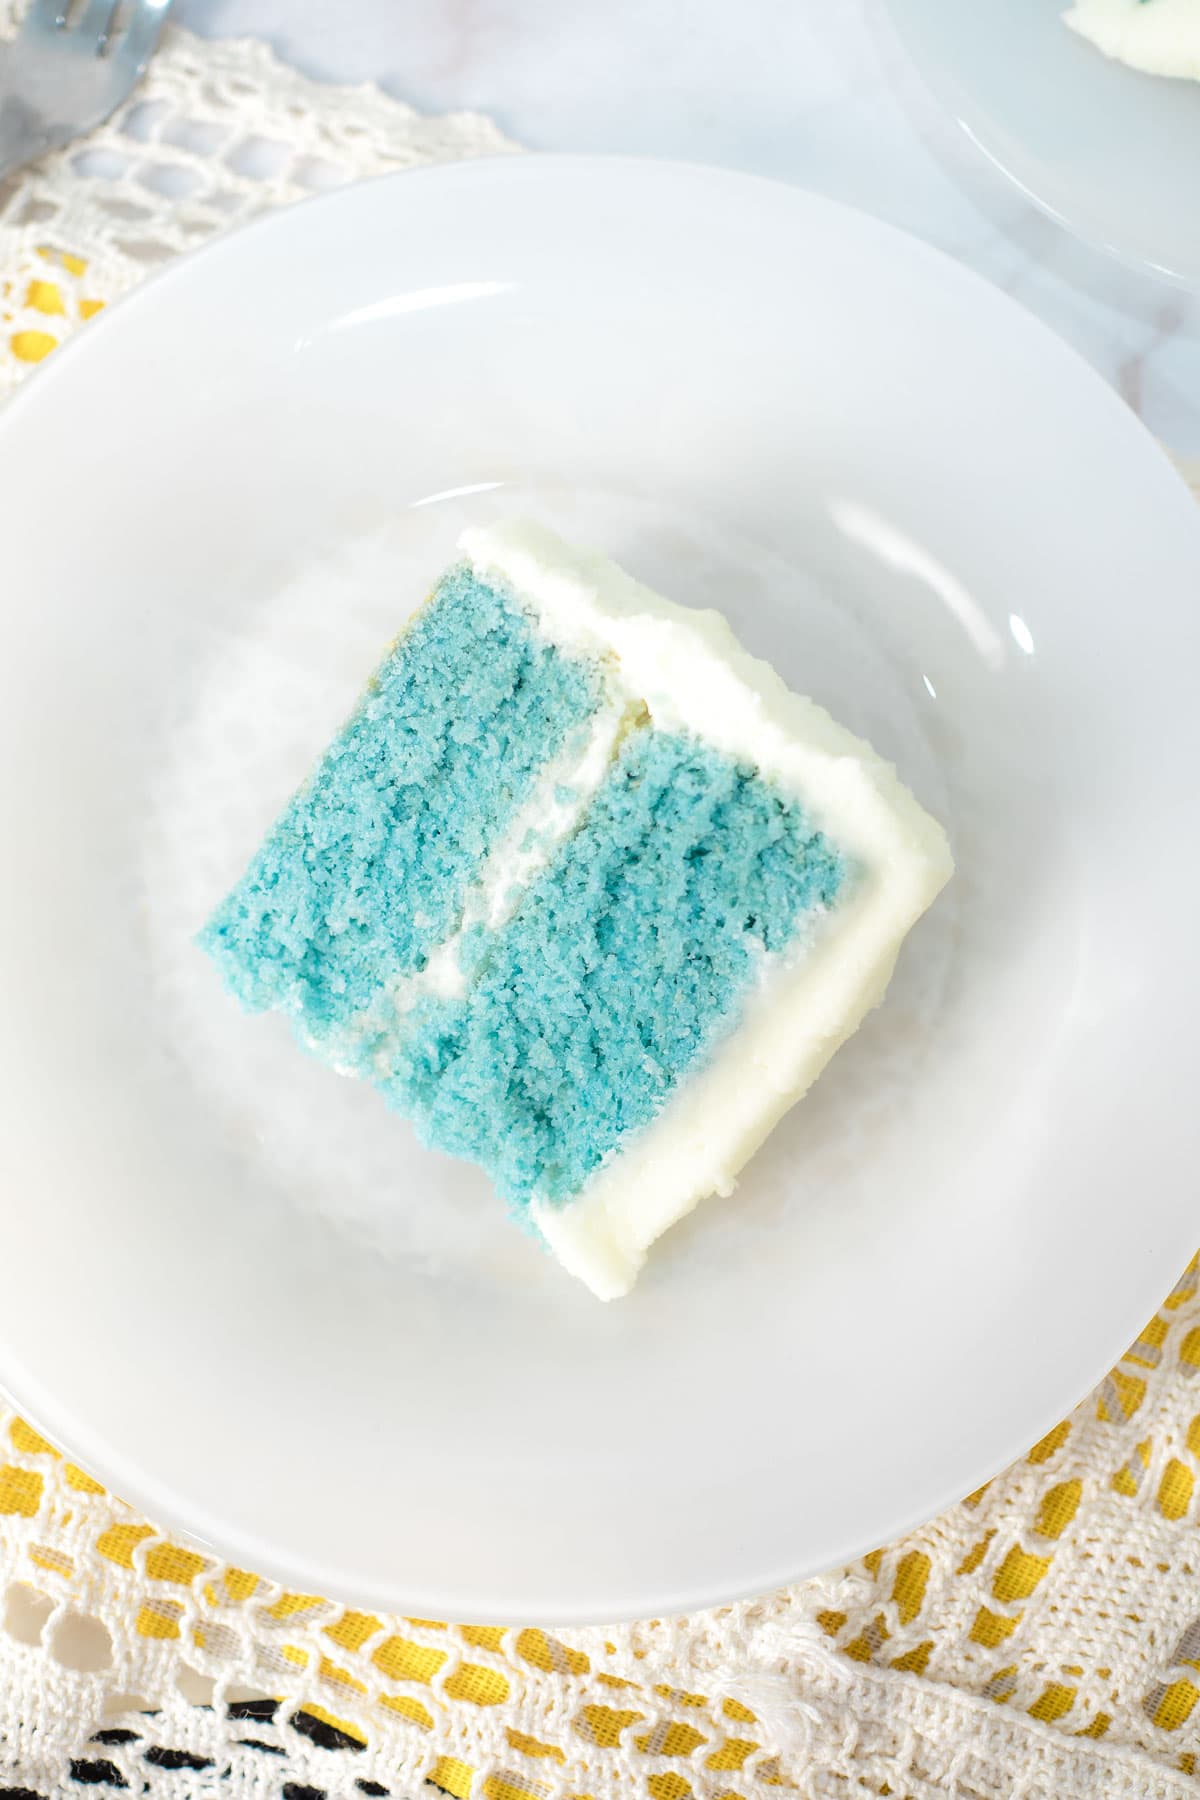 A slice of blue cake with white frosting on a white plate.